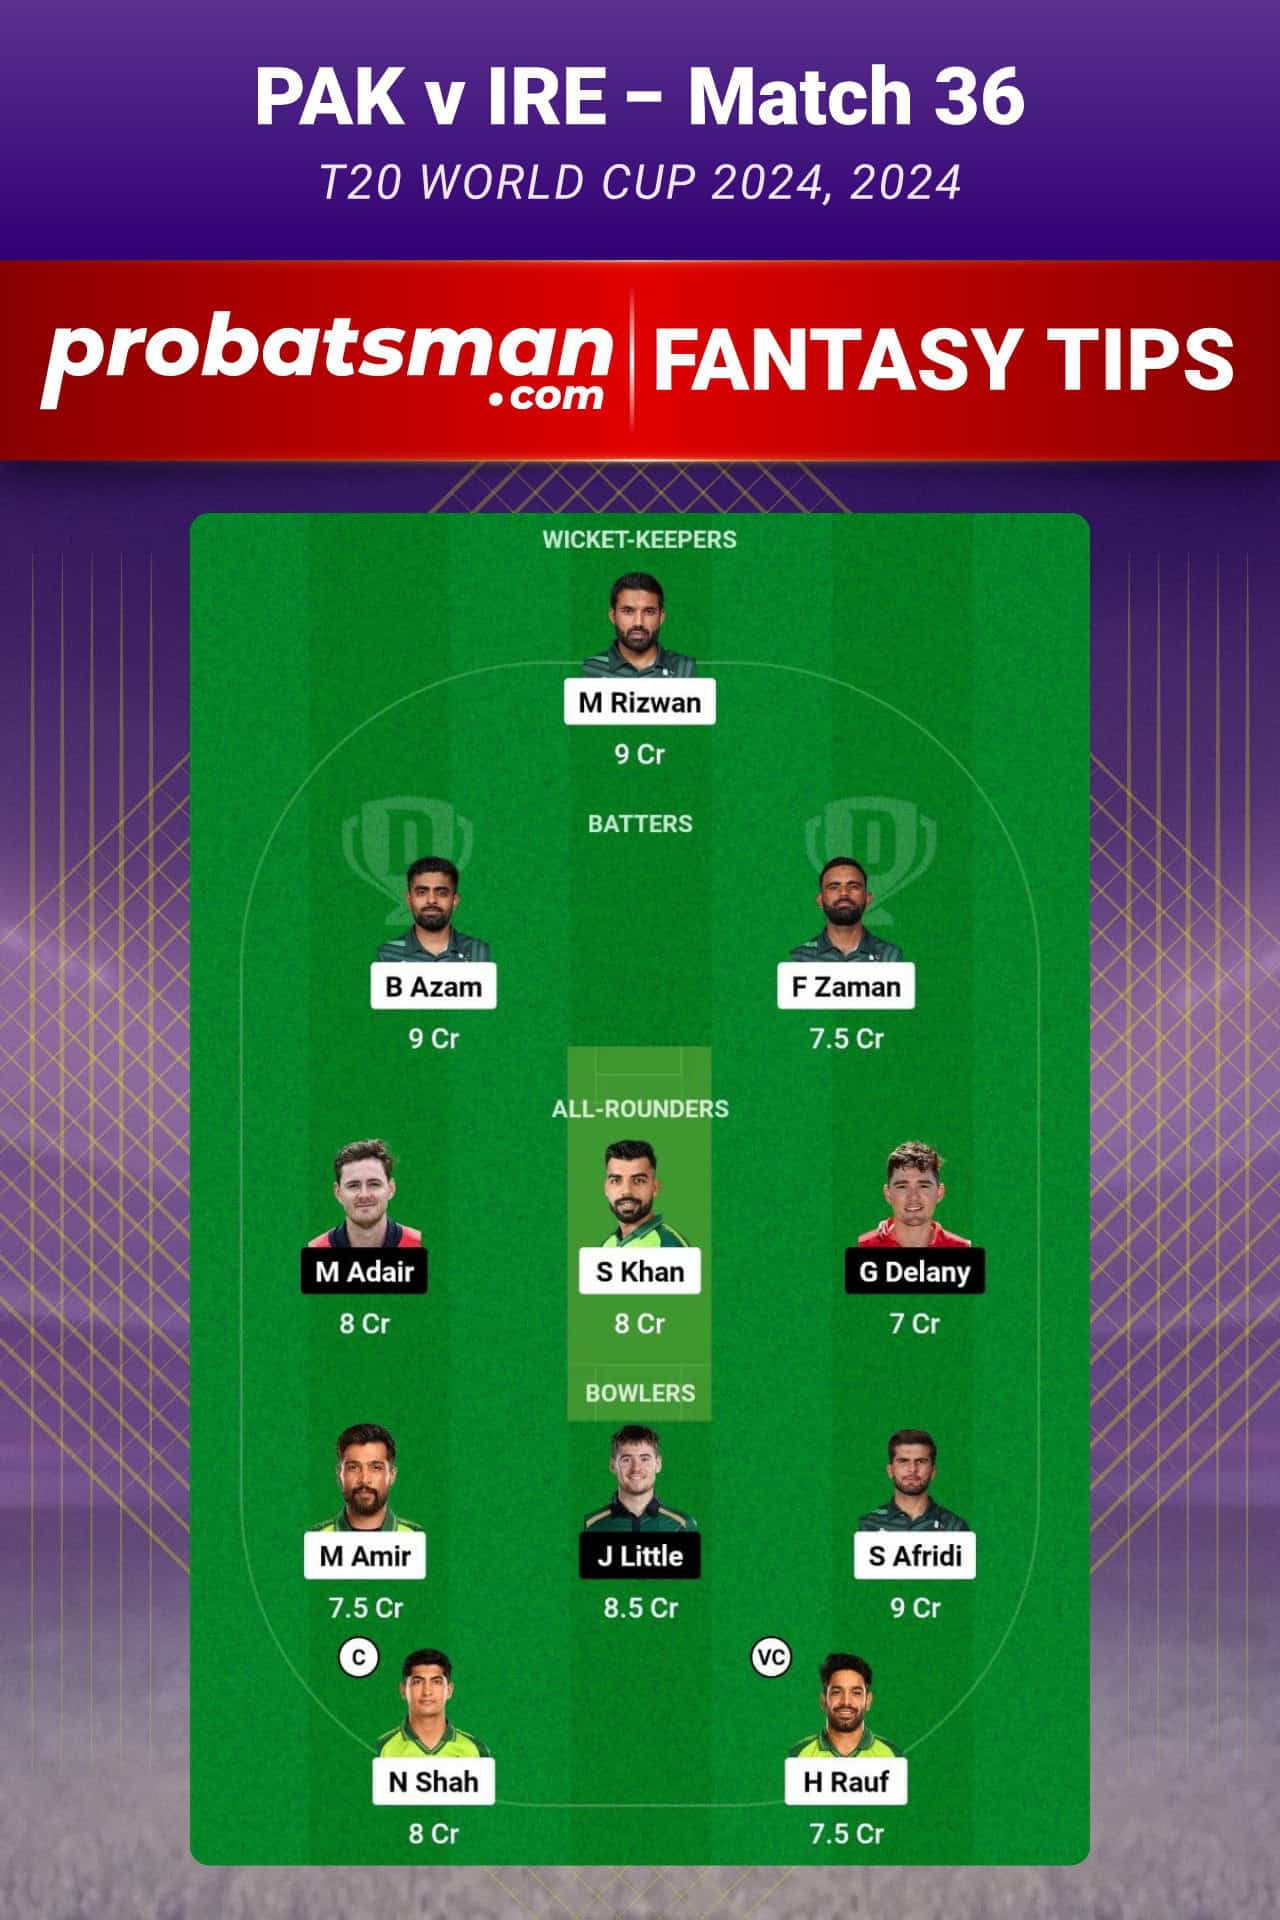 PAK vs IRE Dream11 Prediction For Match 36 of T20 World Cup 2024